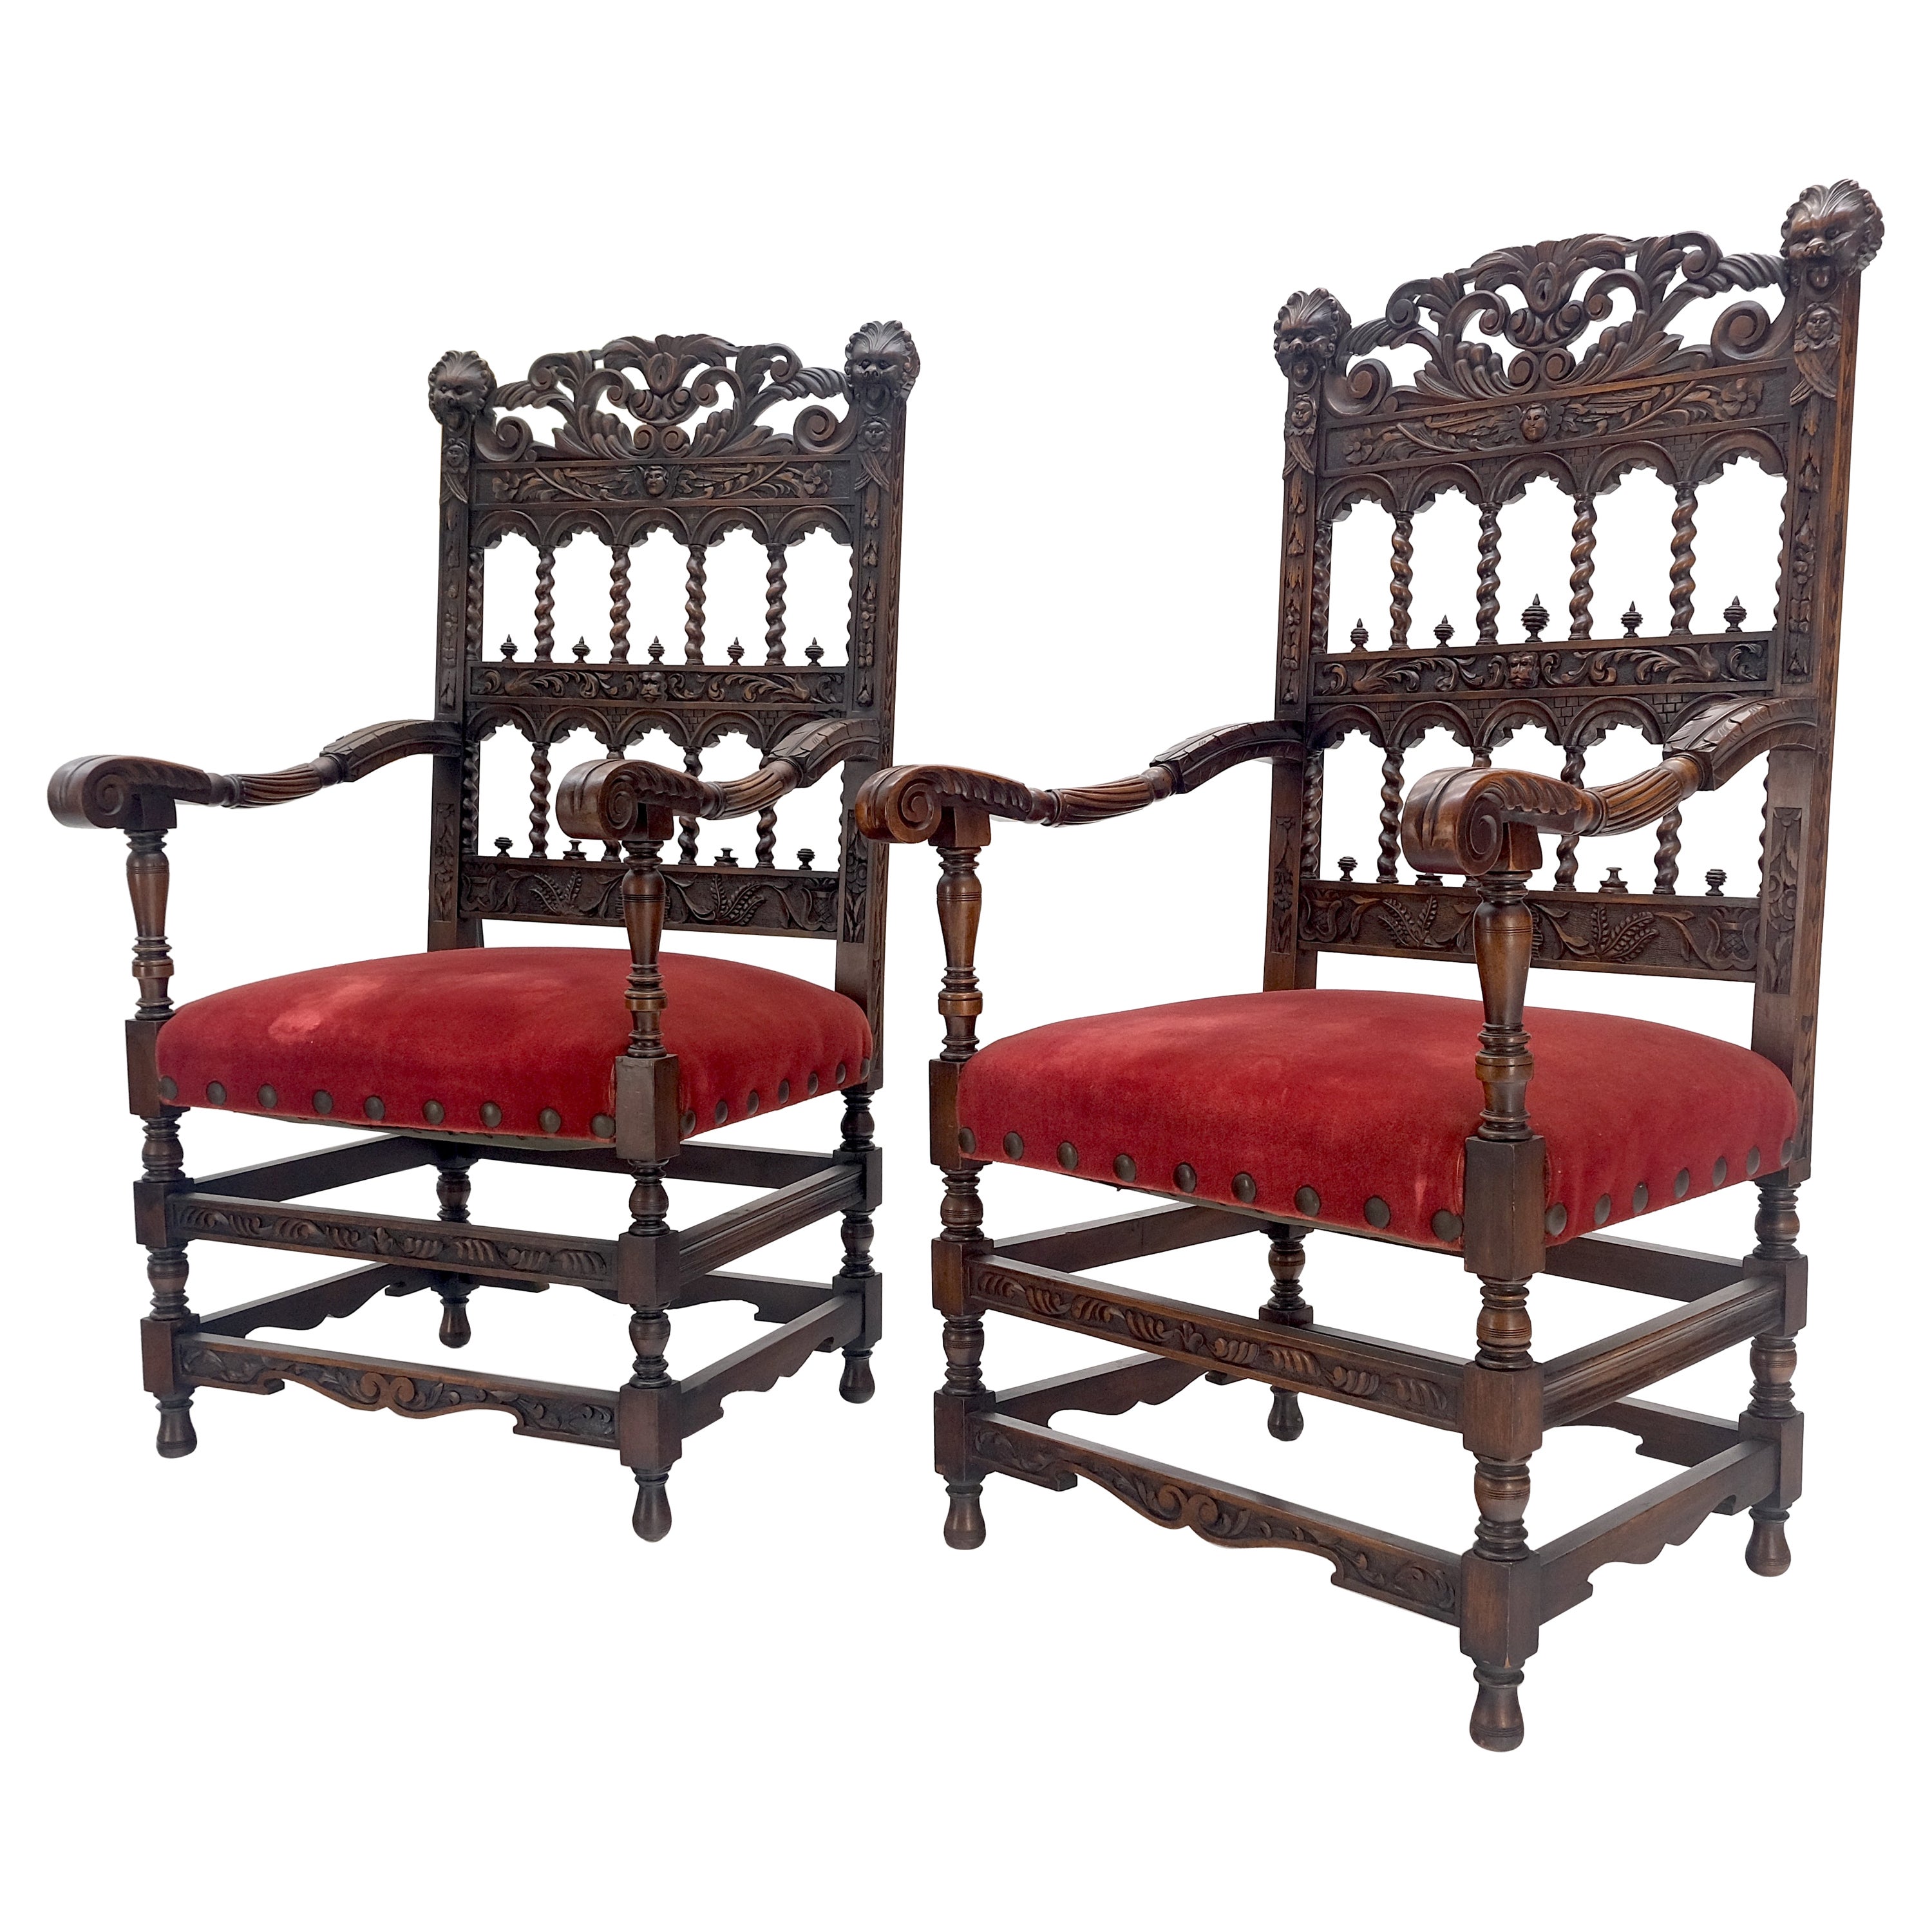 Fine Carved North Winds Faces Heavy Oak Arm Chairs Twisted Spindles c1900s MINT For Sale